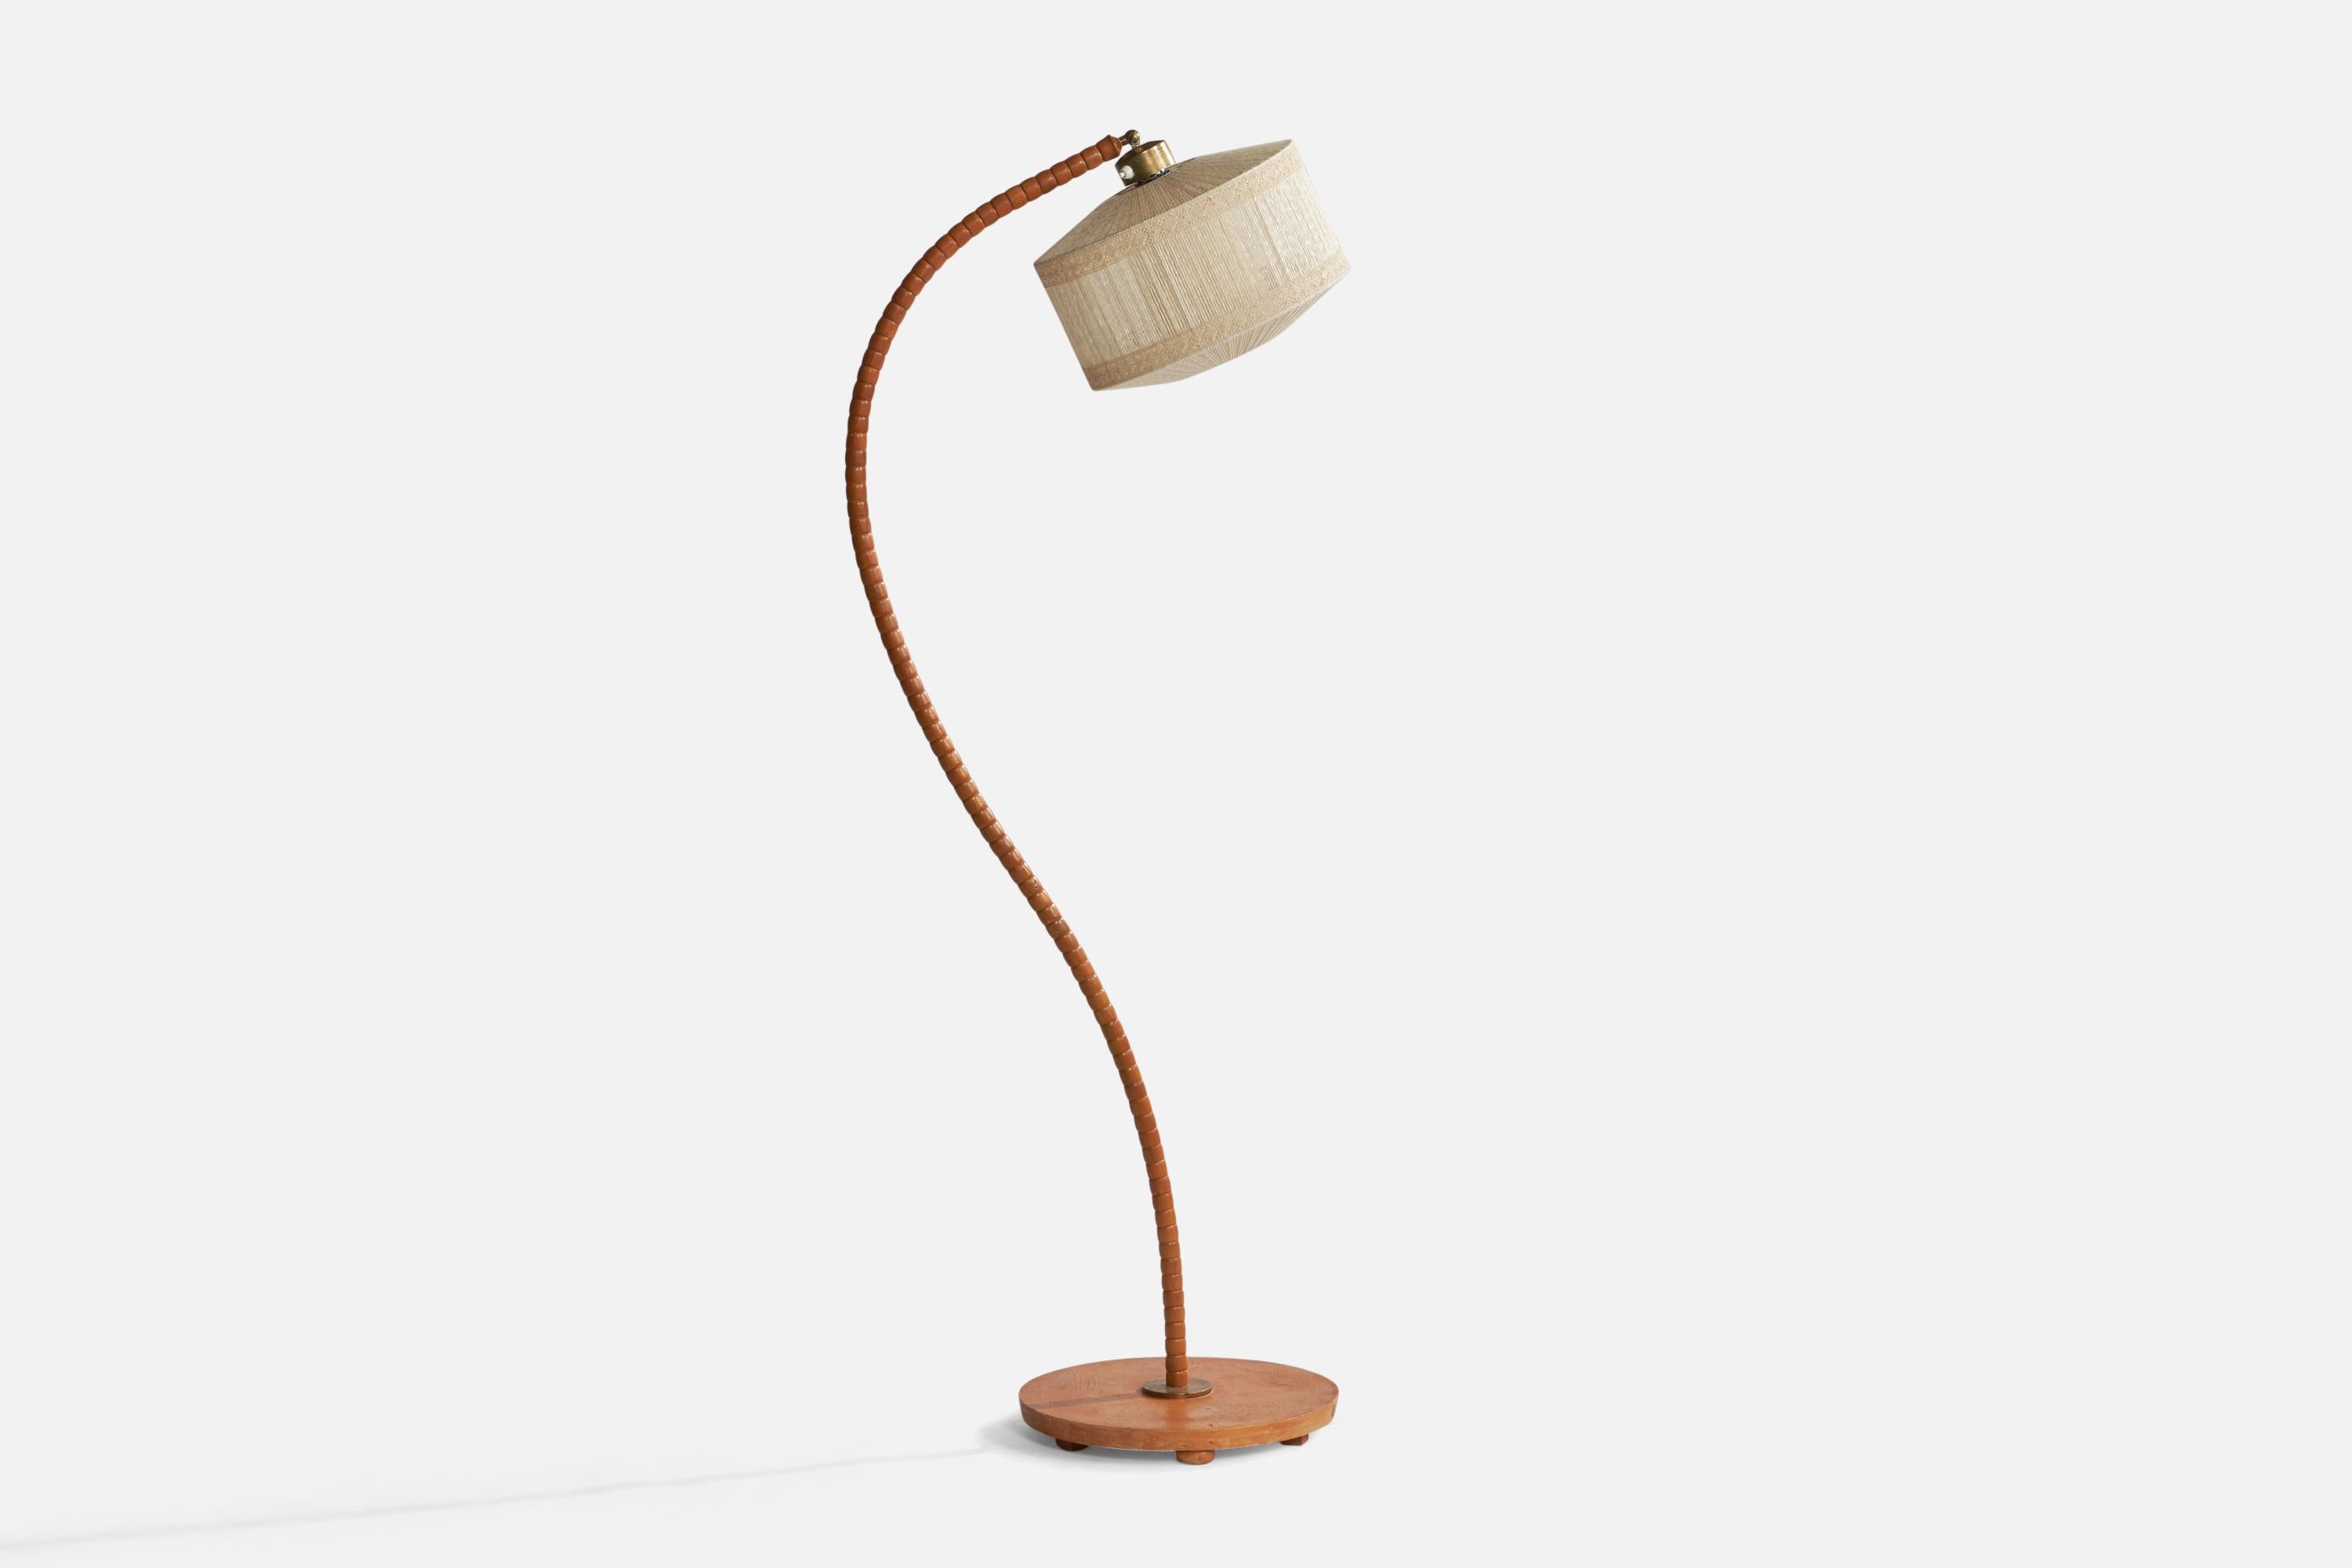 A curved oak, brass and off-white string fabric floor lamp designed and produced in Sweden, 1930s.

Overall Dimensions (inches): 62.5” H x 15.3” W x 24” D. Stated dimensions include shade.
Bulb Specifications: E-26 Bulb
Number of Sockets: 1
All